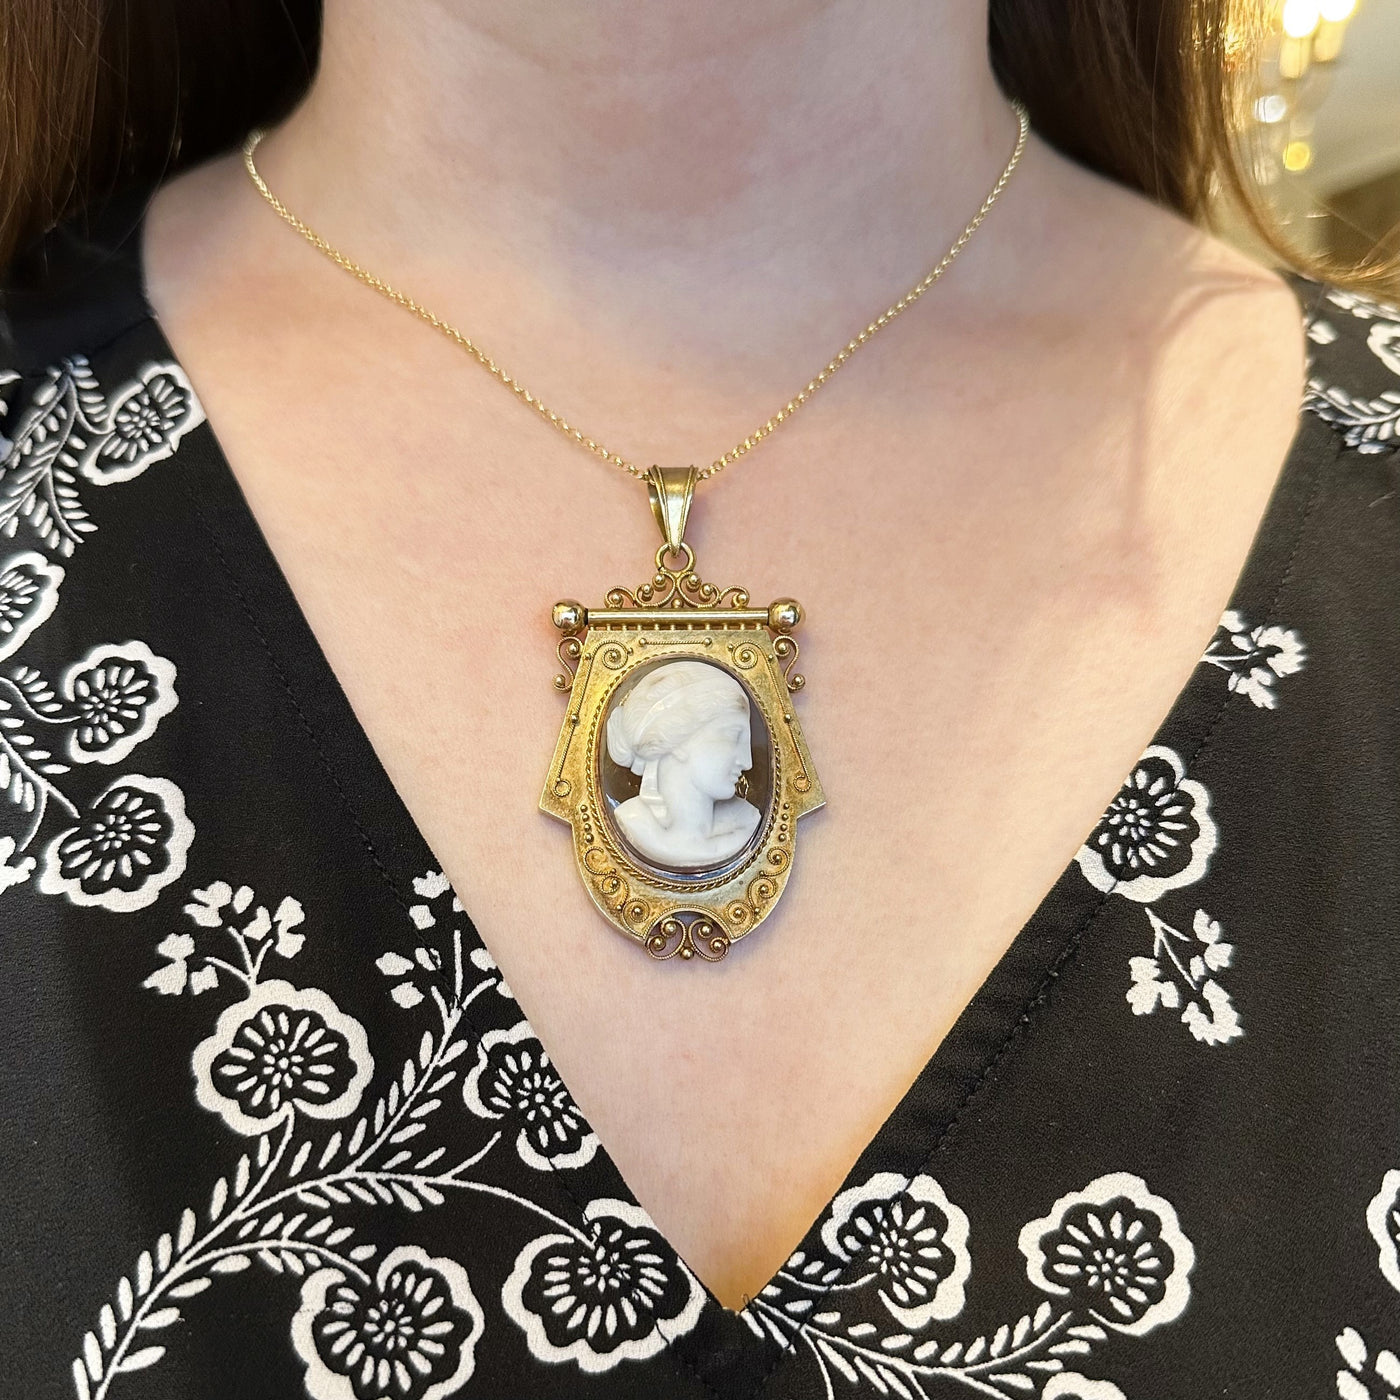 Victorian Etruscan Revival 14K Yellow Gold Cameo Pendant